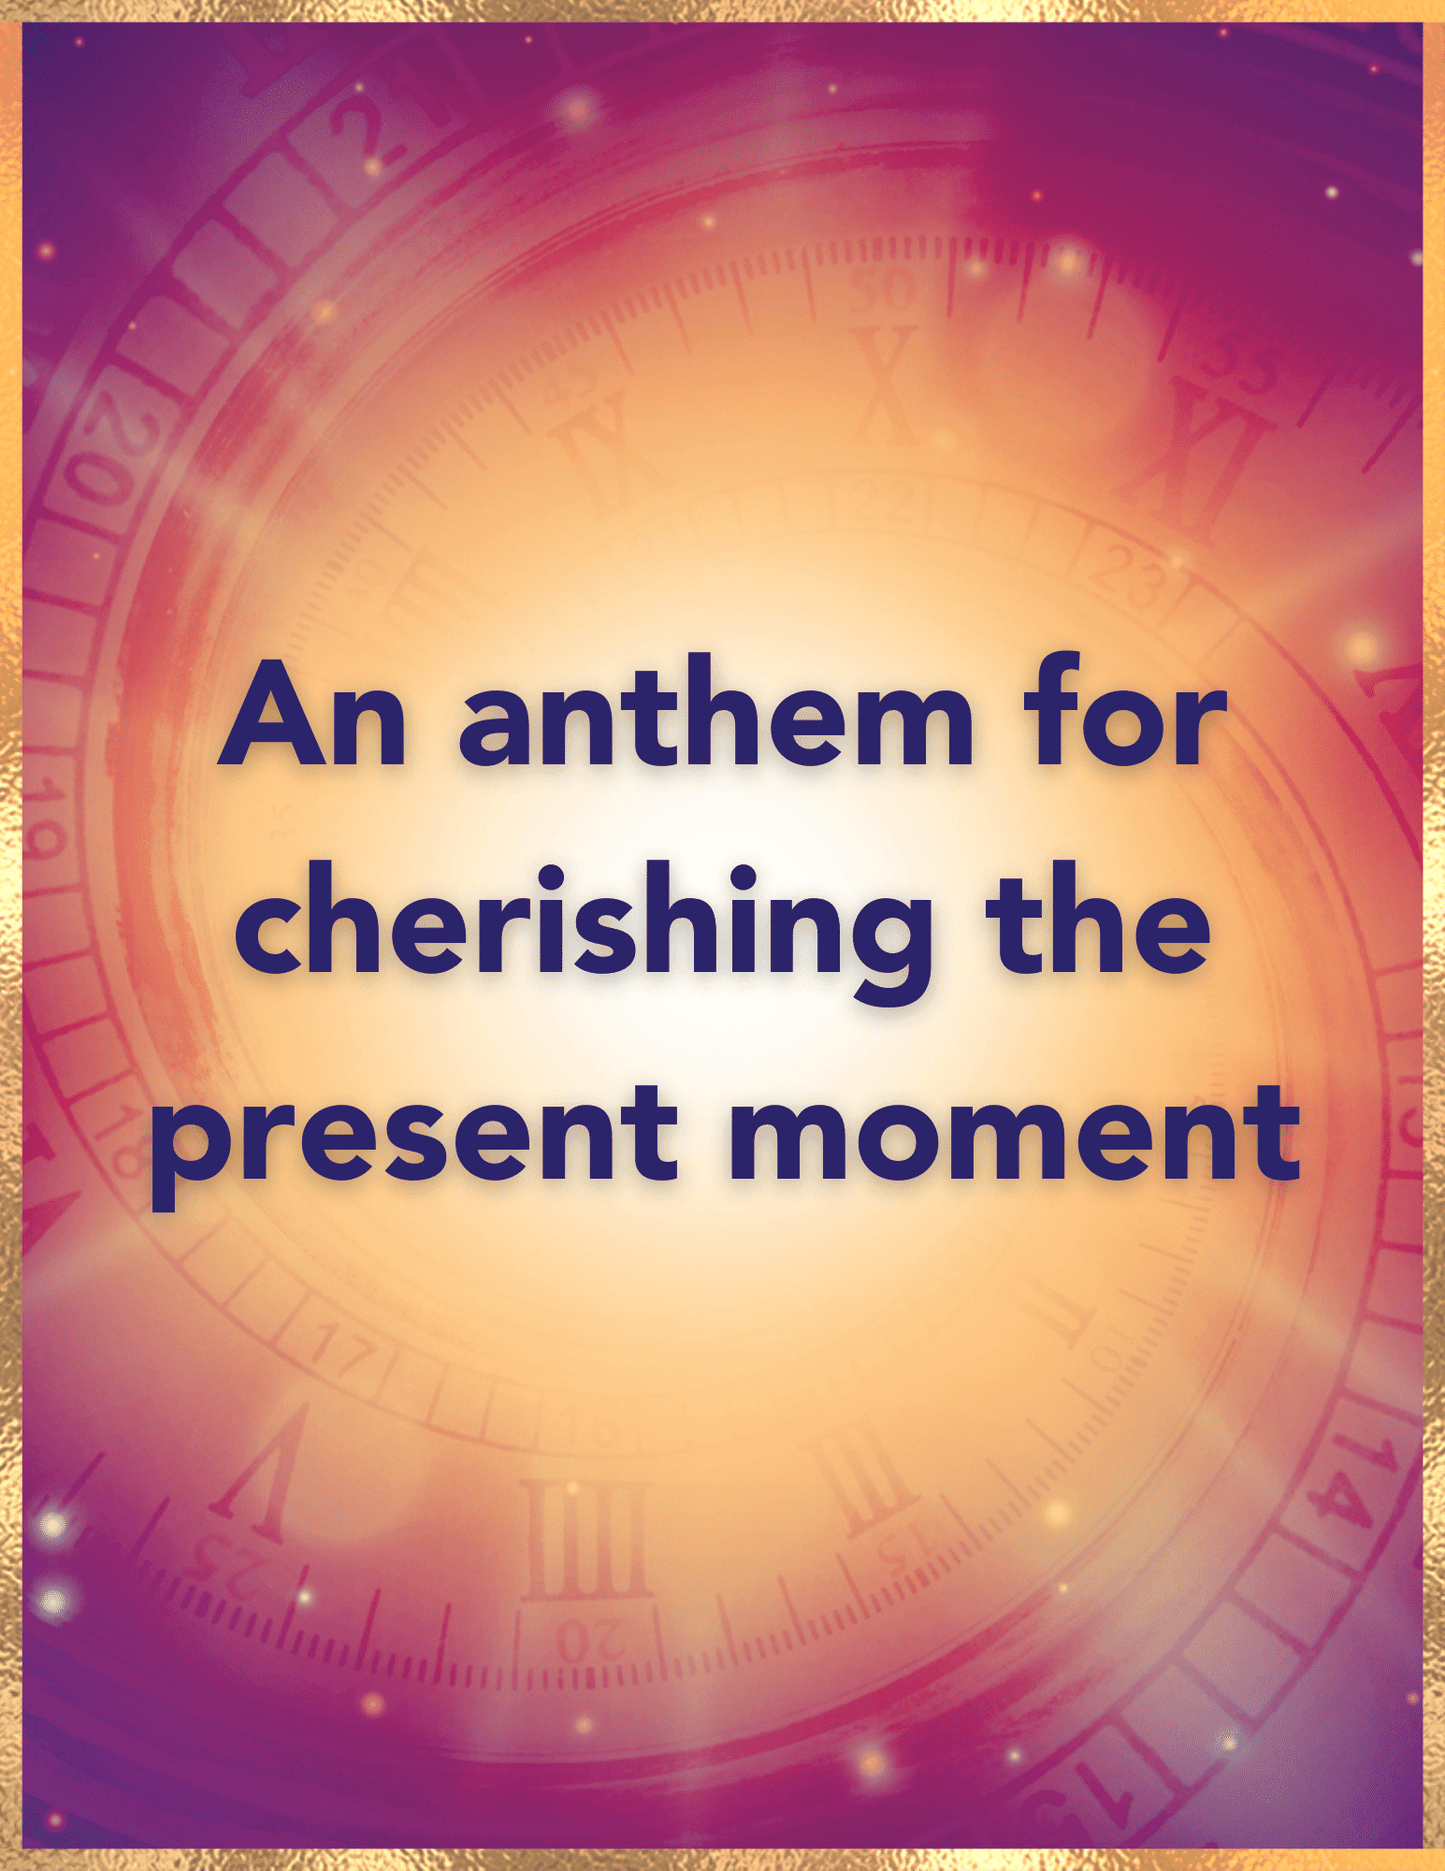 MOMENT TO MOMENT (Sheet Music)